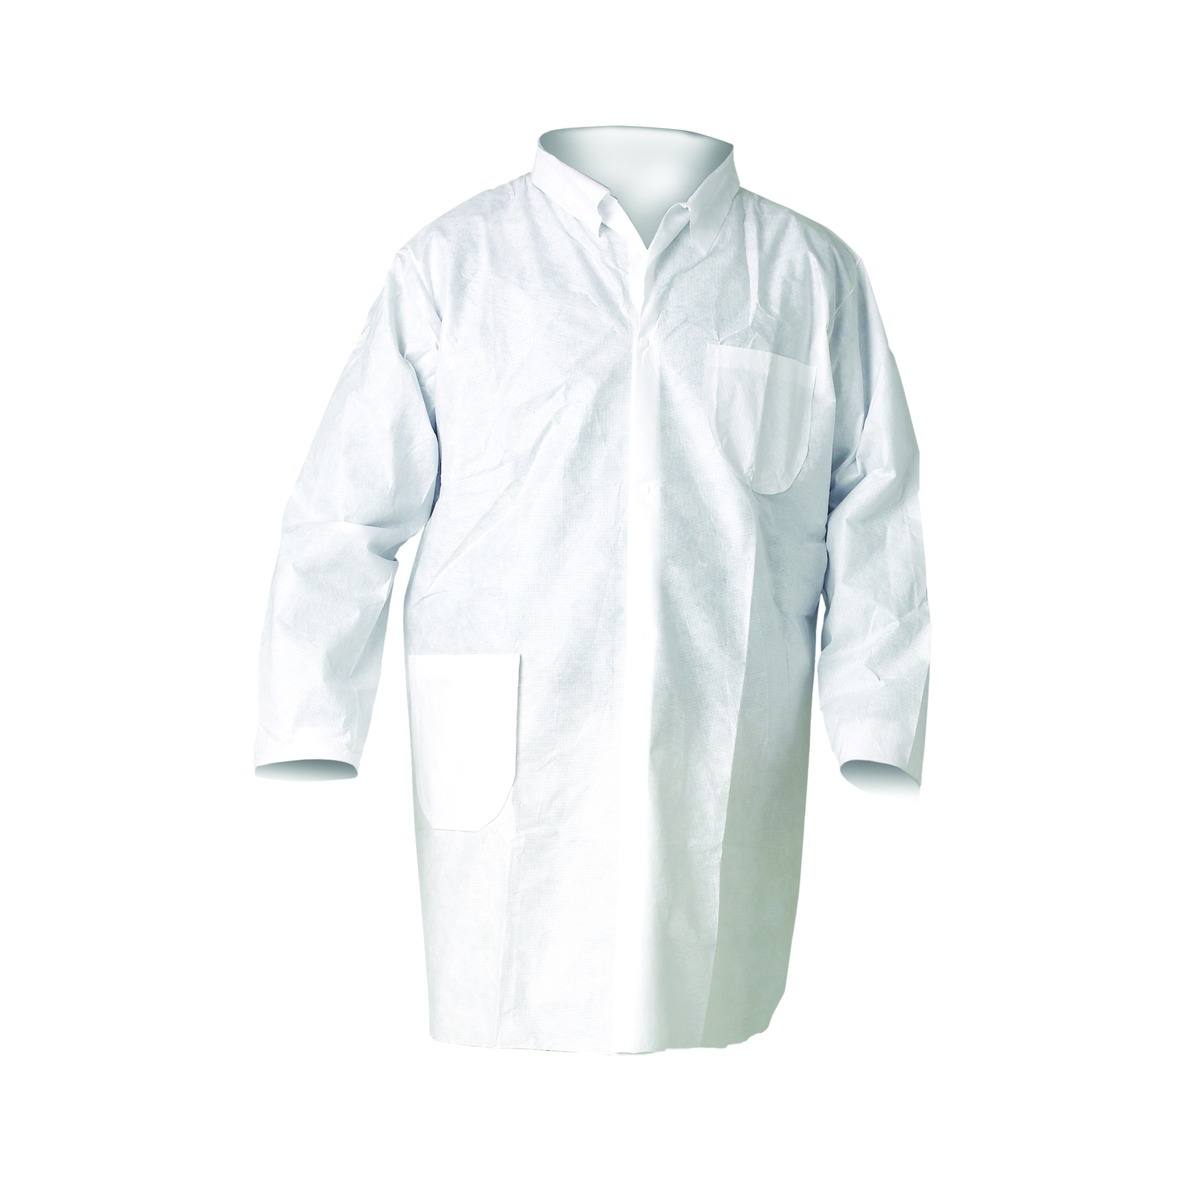 Kimberly-Clark Professional™ Medium White KleenGuard™ A20 SMS Disposable Lab Coat (Availability restrictions apply.)